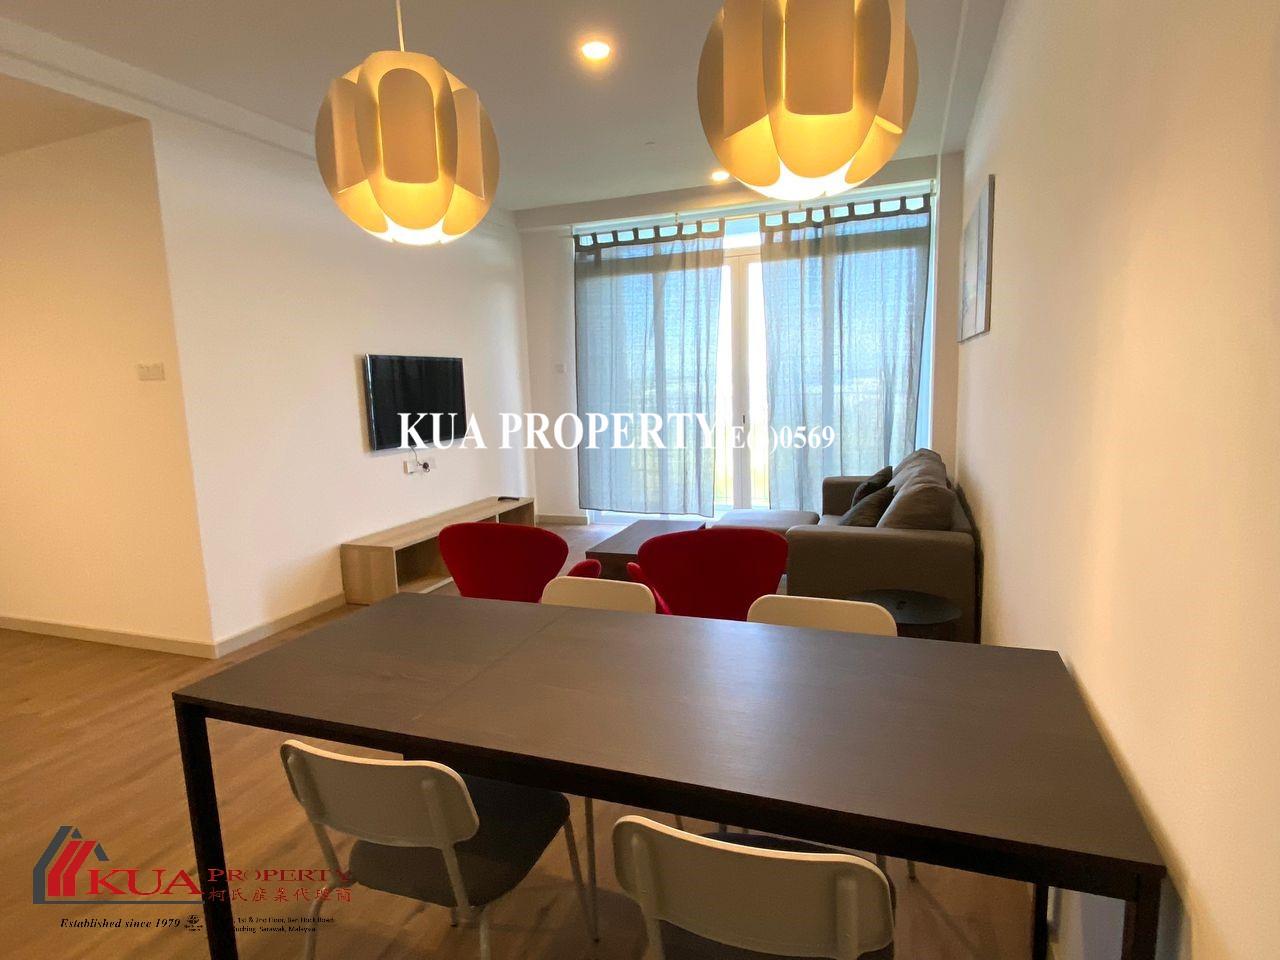 Avona Residence Apartment FOR RENT! Located at Tabuan Tranquility